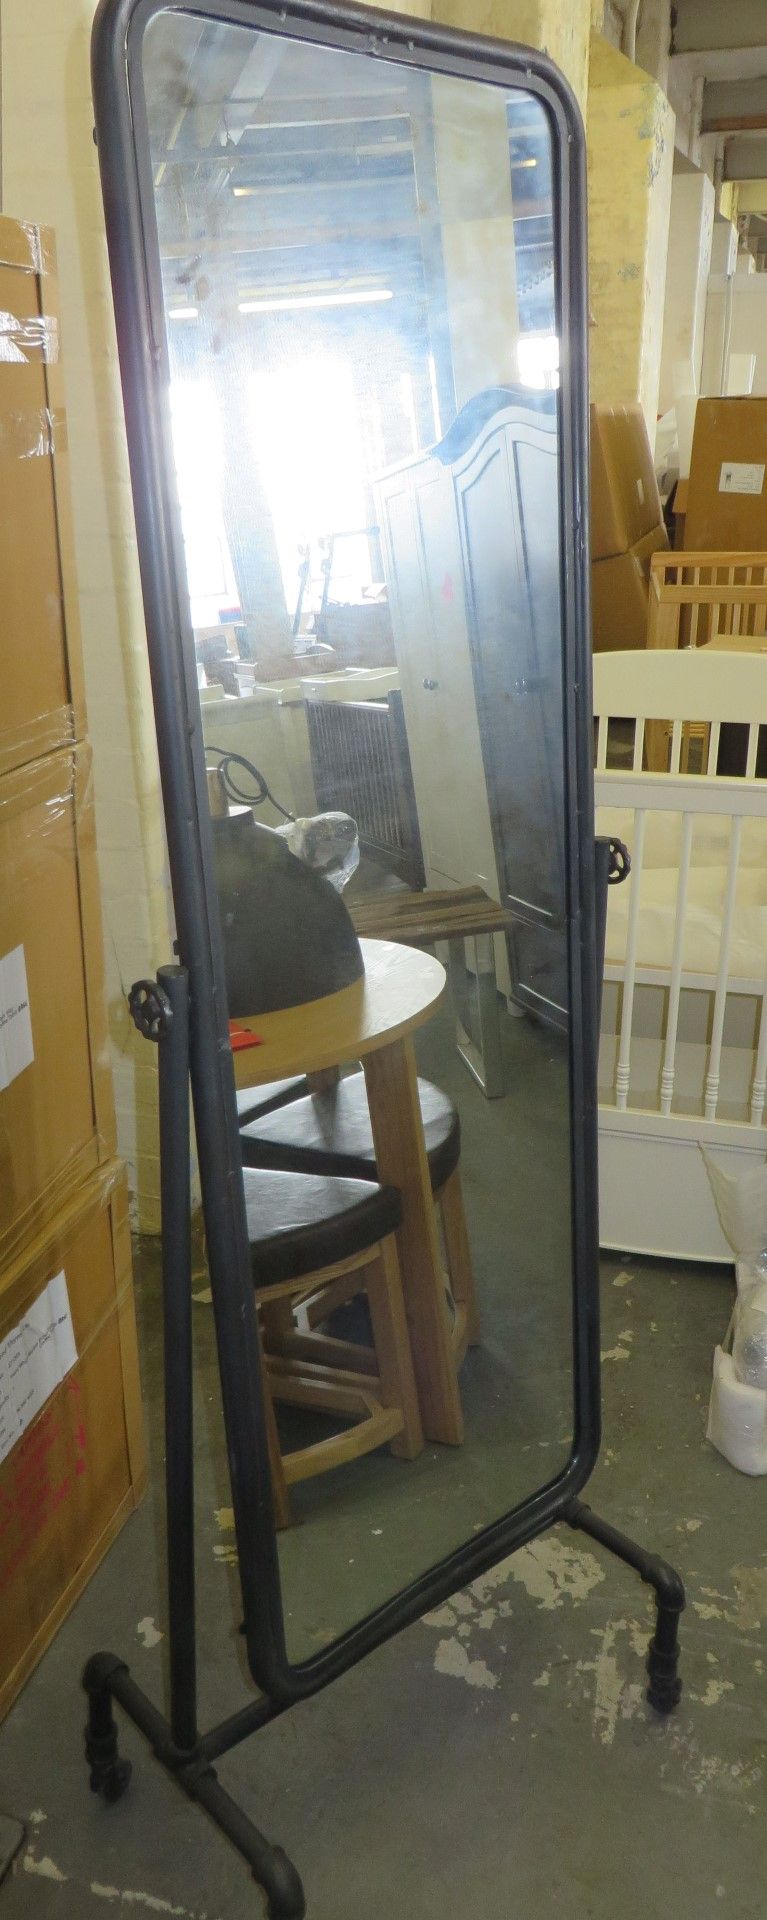 1 x Atkin and Thyme Industrial Floor Mirror on Casters - New/Boxed - CL185 - Ref: DSYATM - Location: - Image 4 of 8